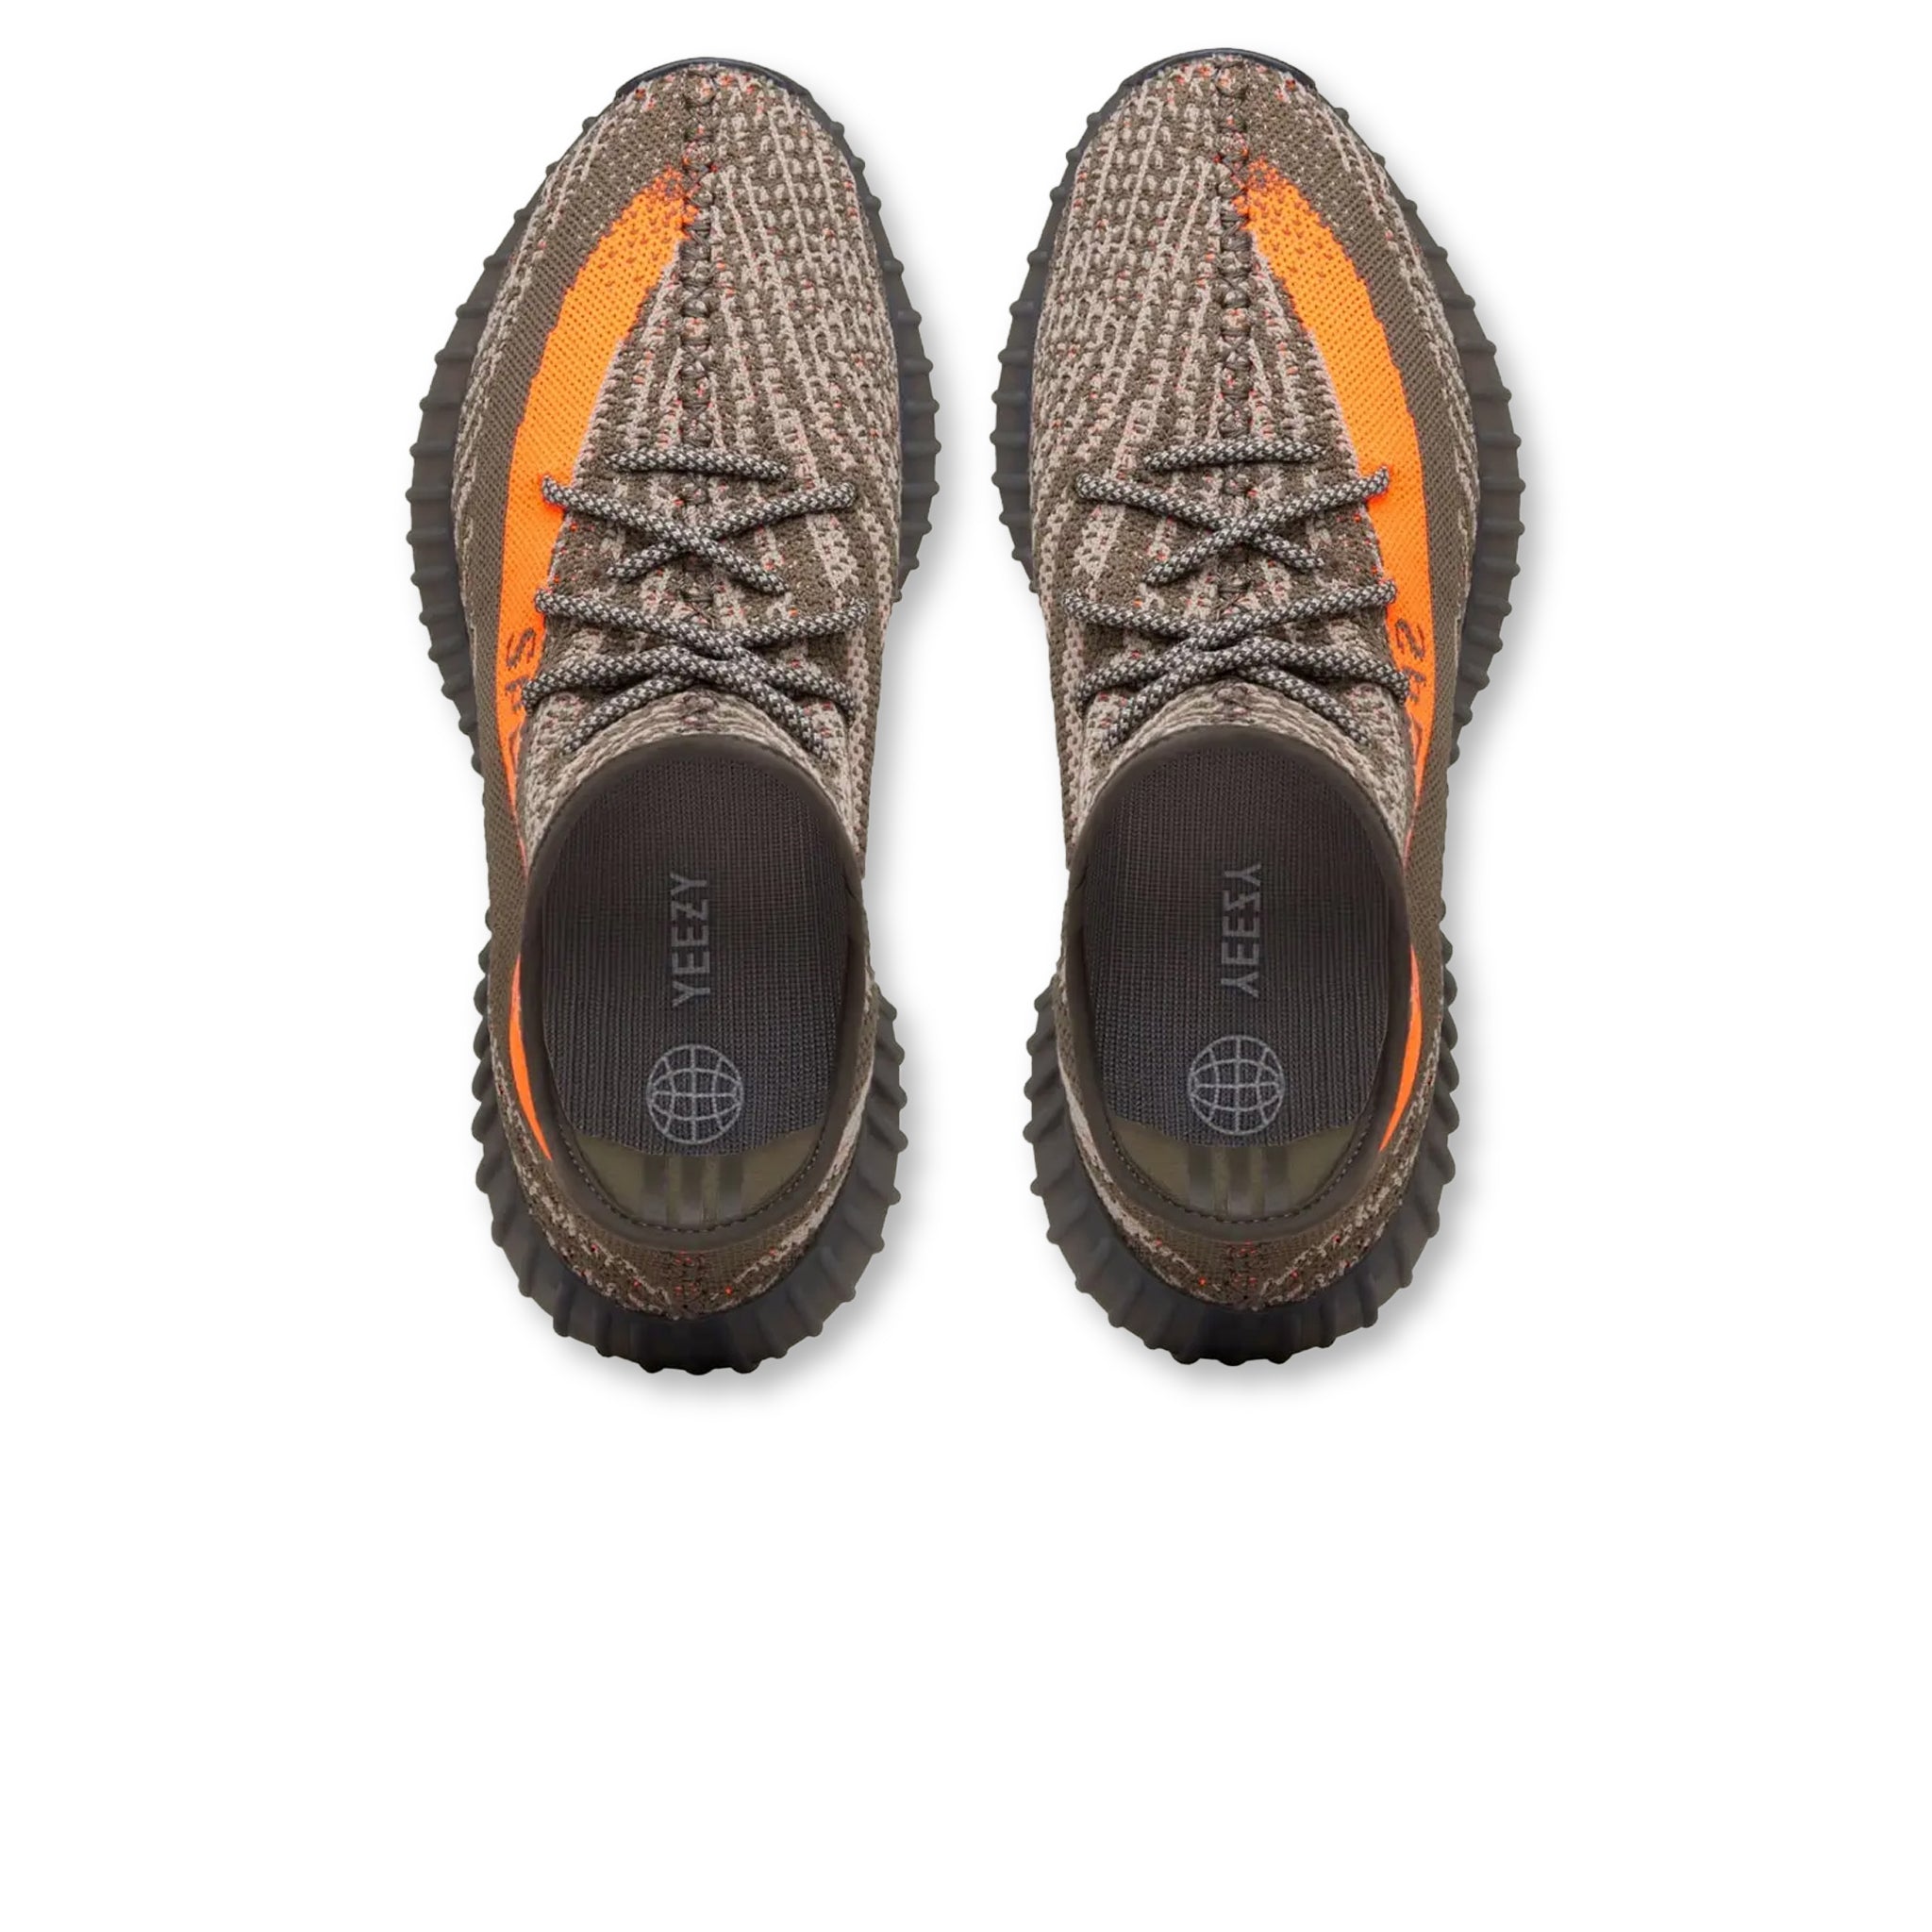 Top down view of Adidas Yeezy Boost 350 V2 Carbon Beluga HQ7045